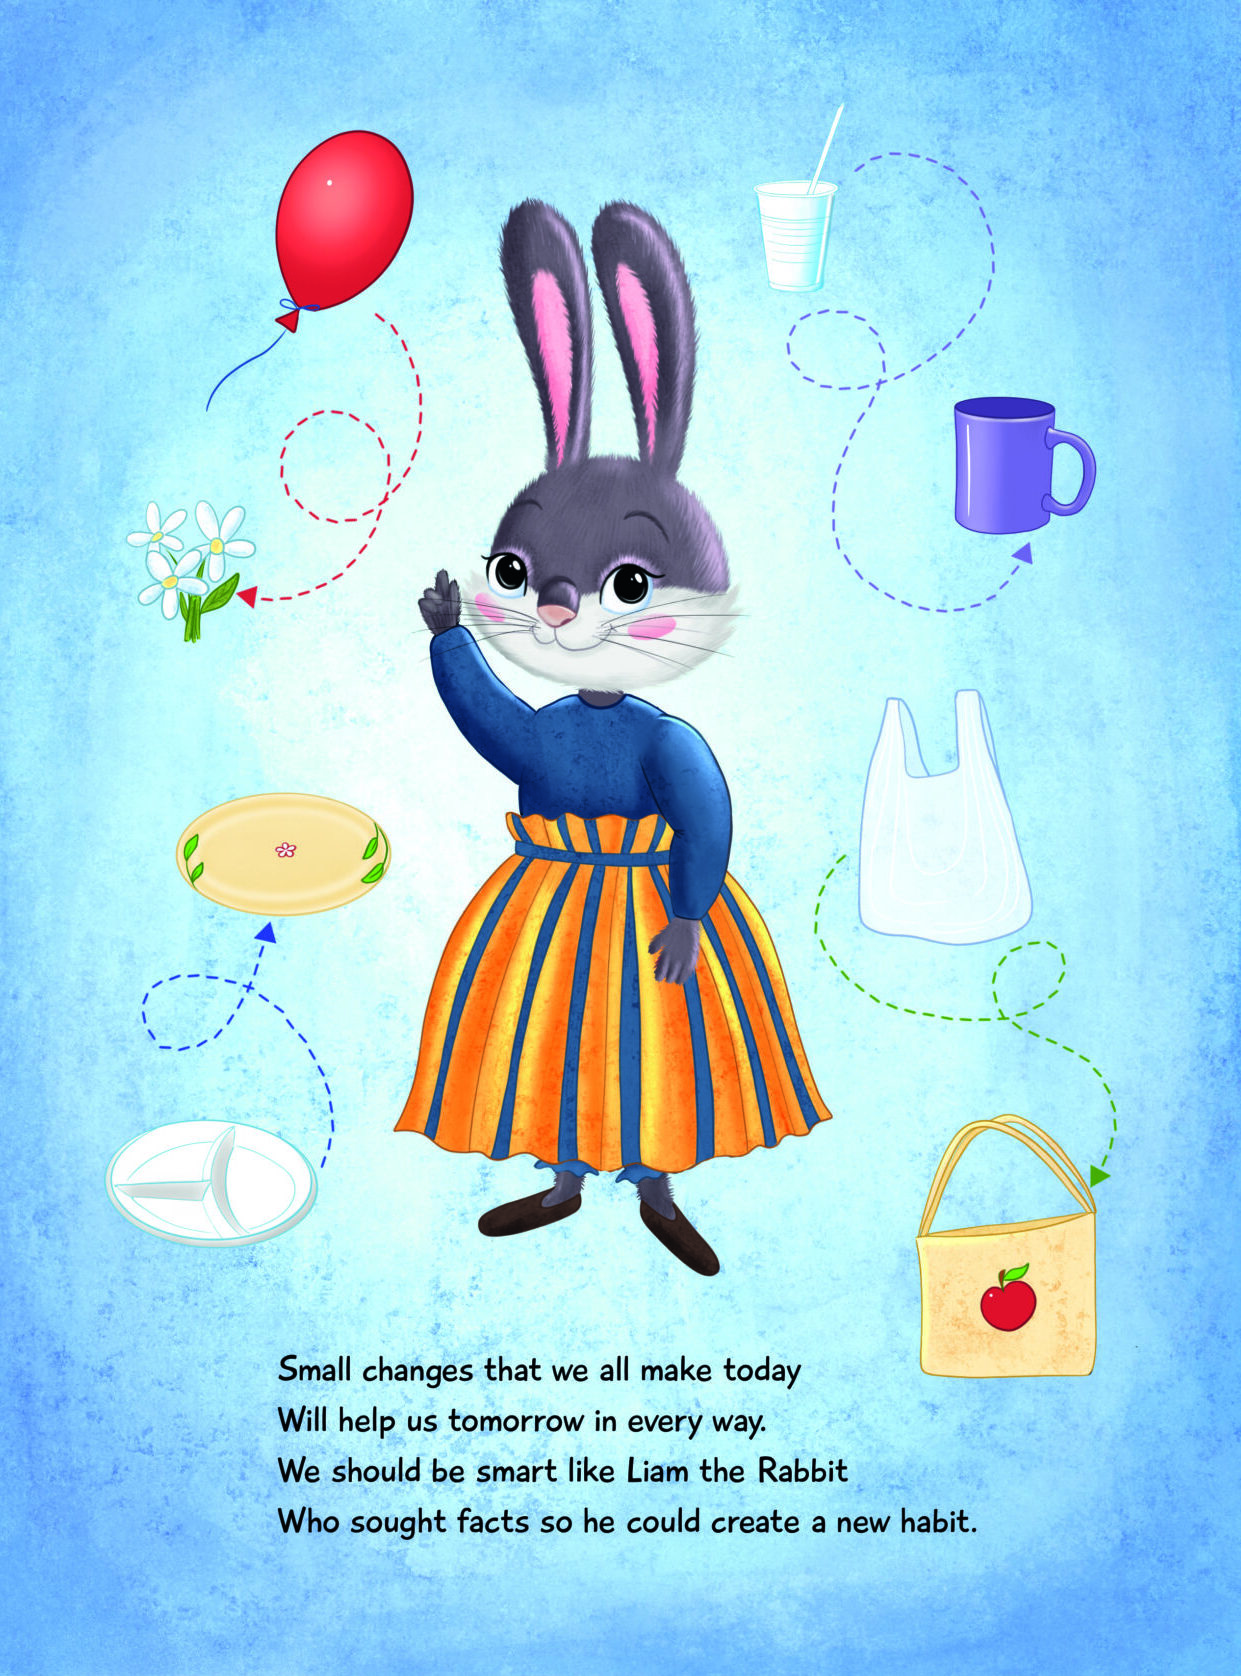 Reduce, Reuse, Recycle with Liam, the Smart rabbit, Earth day